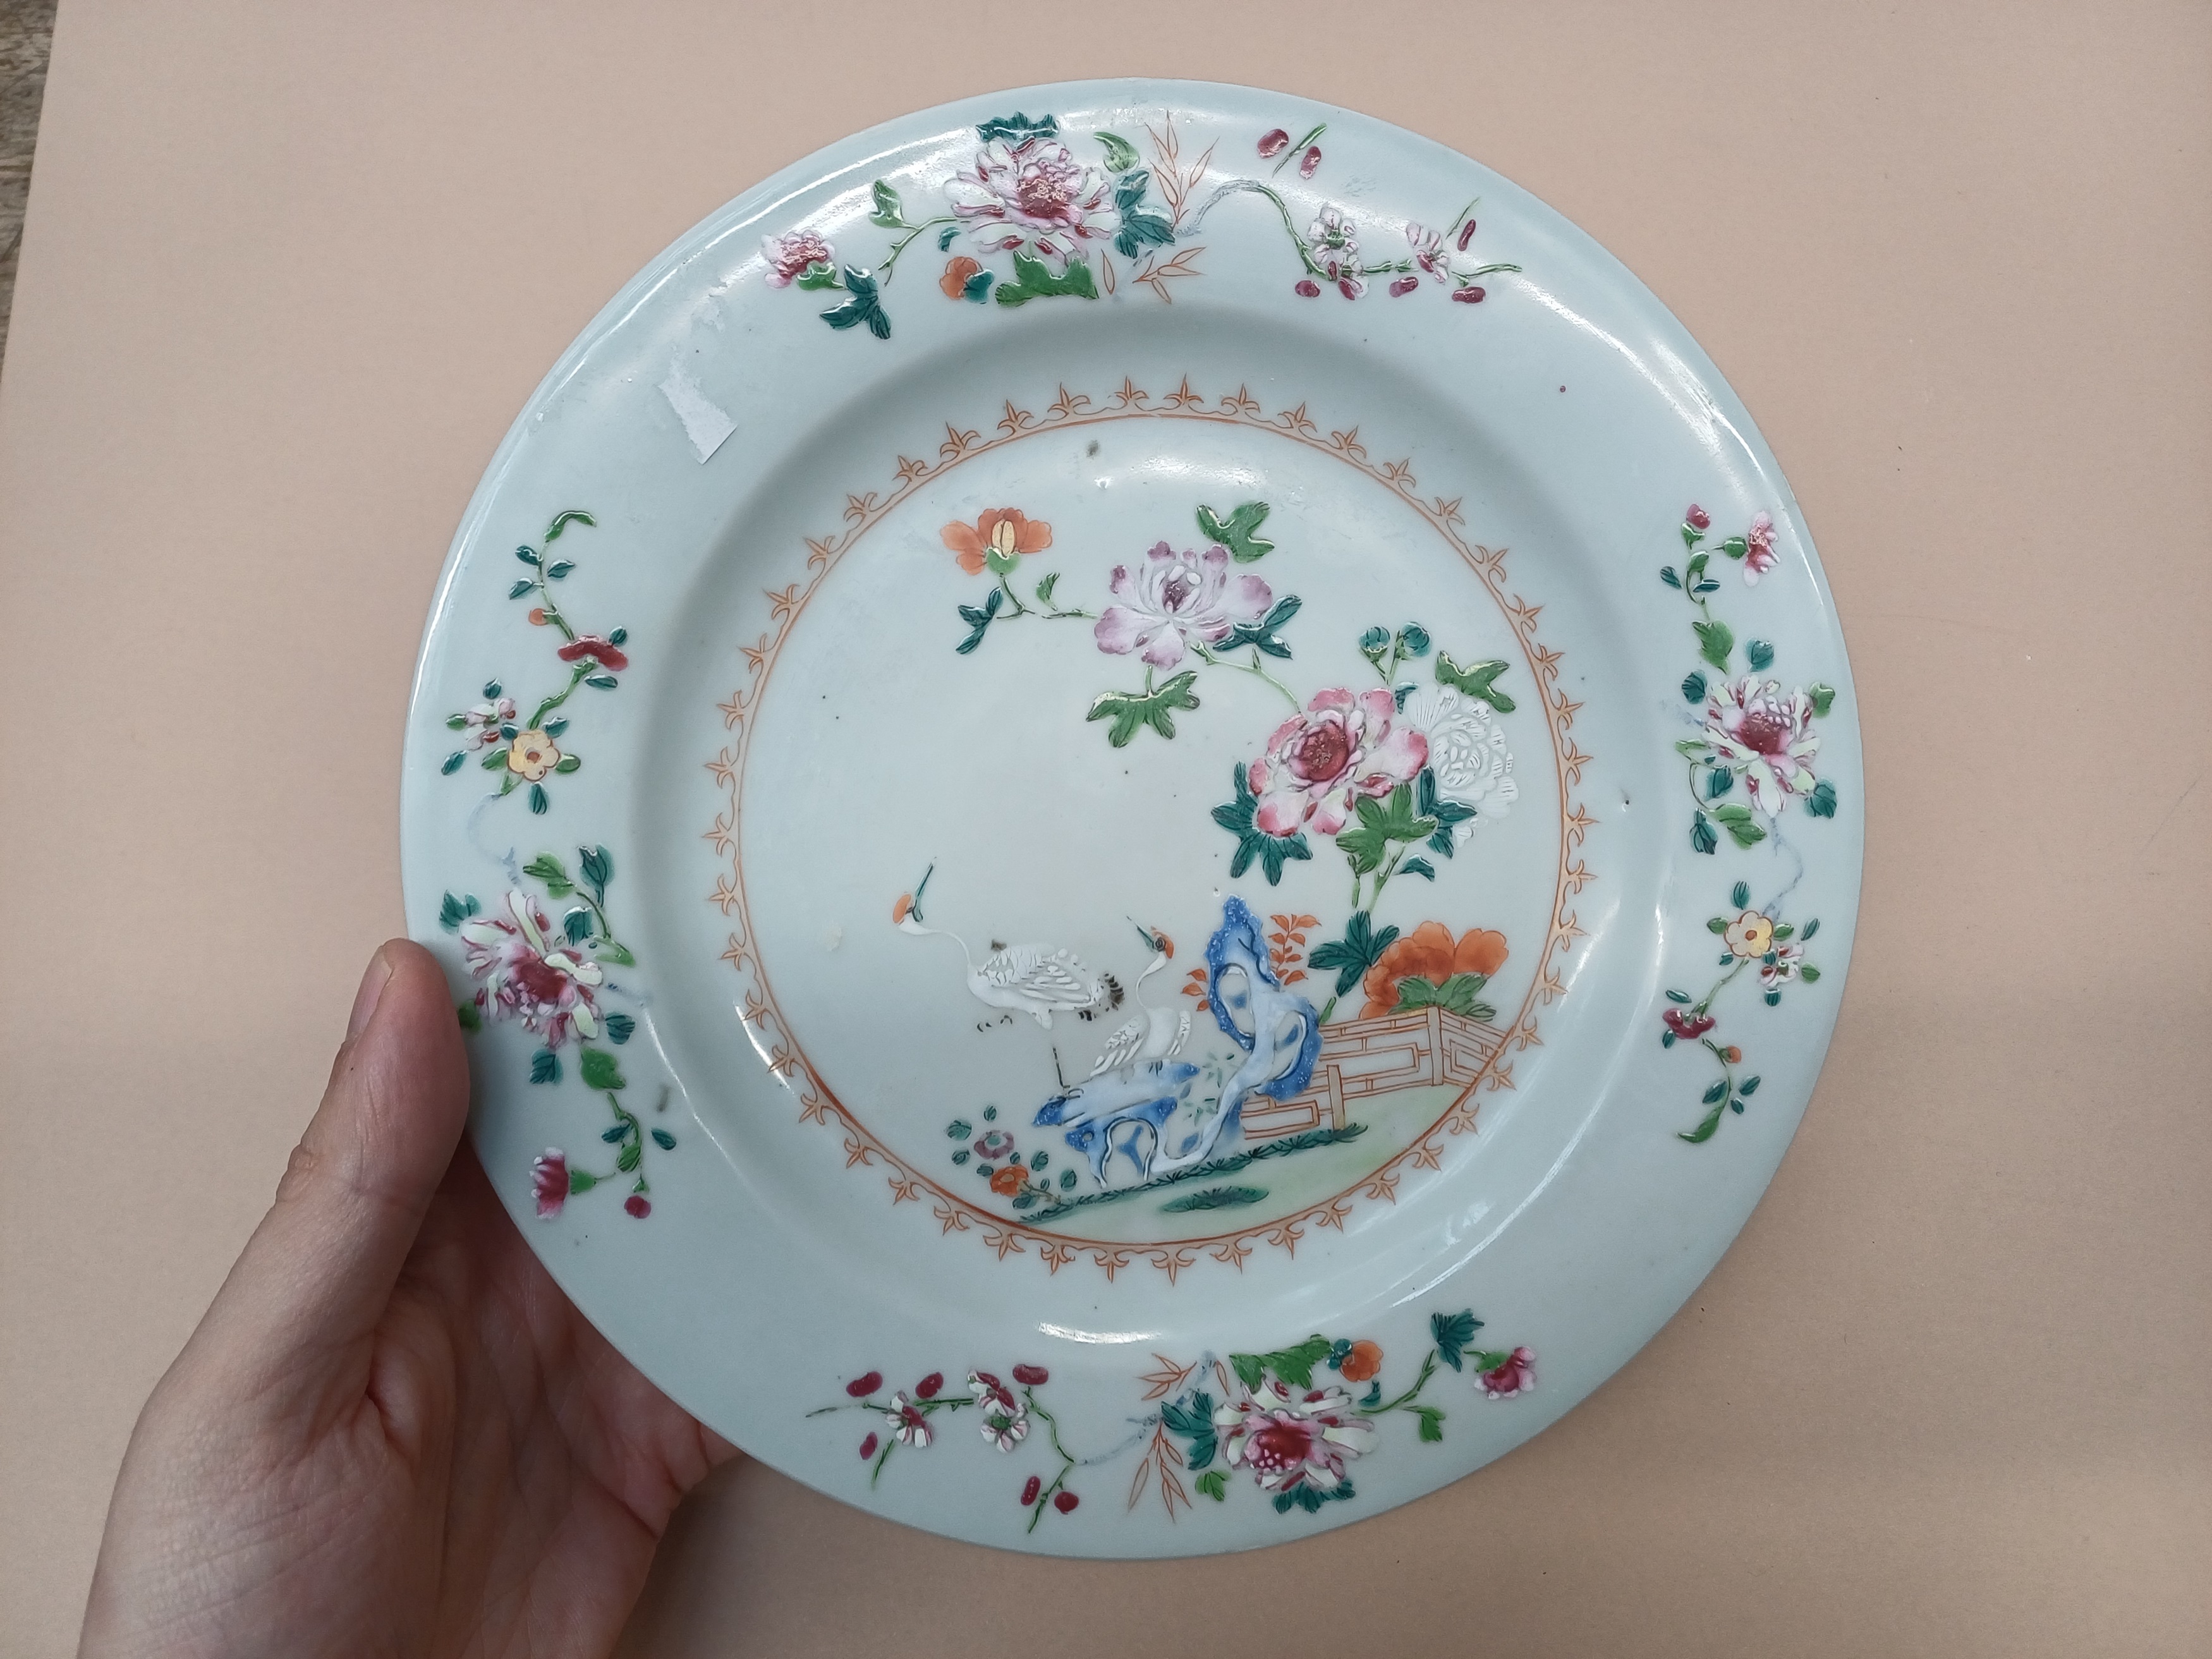 TWO CHINESE EXPORT FAMILLE-ROSE 'CRANES AND BLOSSOMS' DISHES 清十八世紀 外銷粉彩牡丹鶴紋盤兩件 - Image 13 of 15